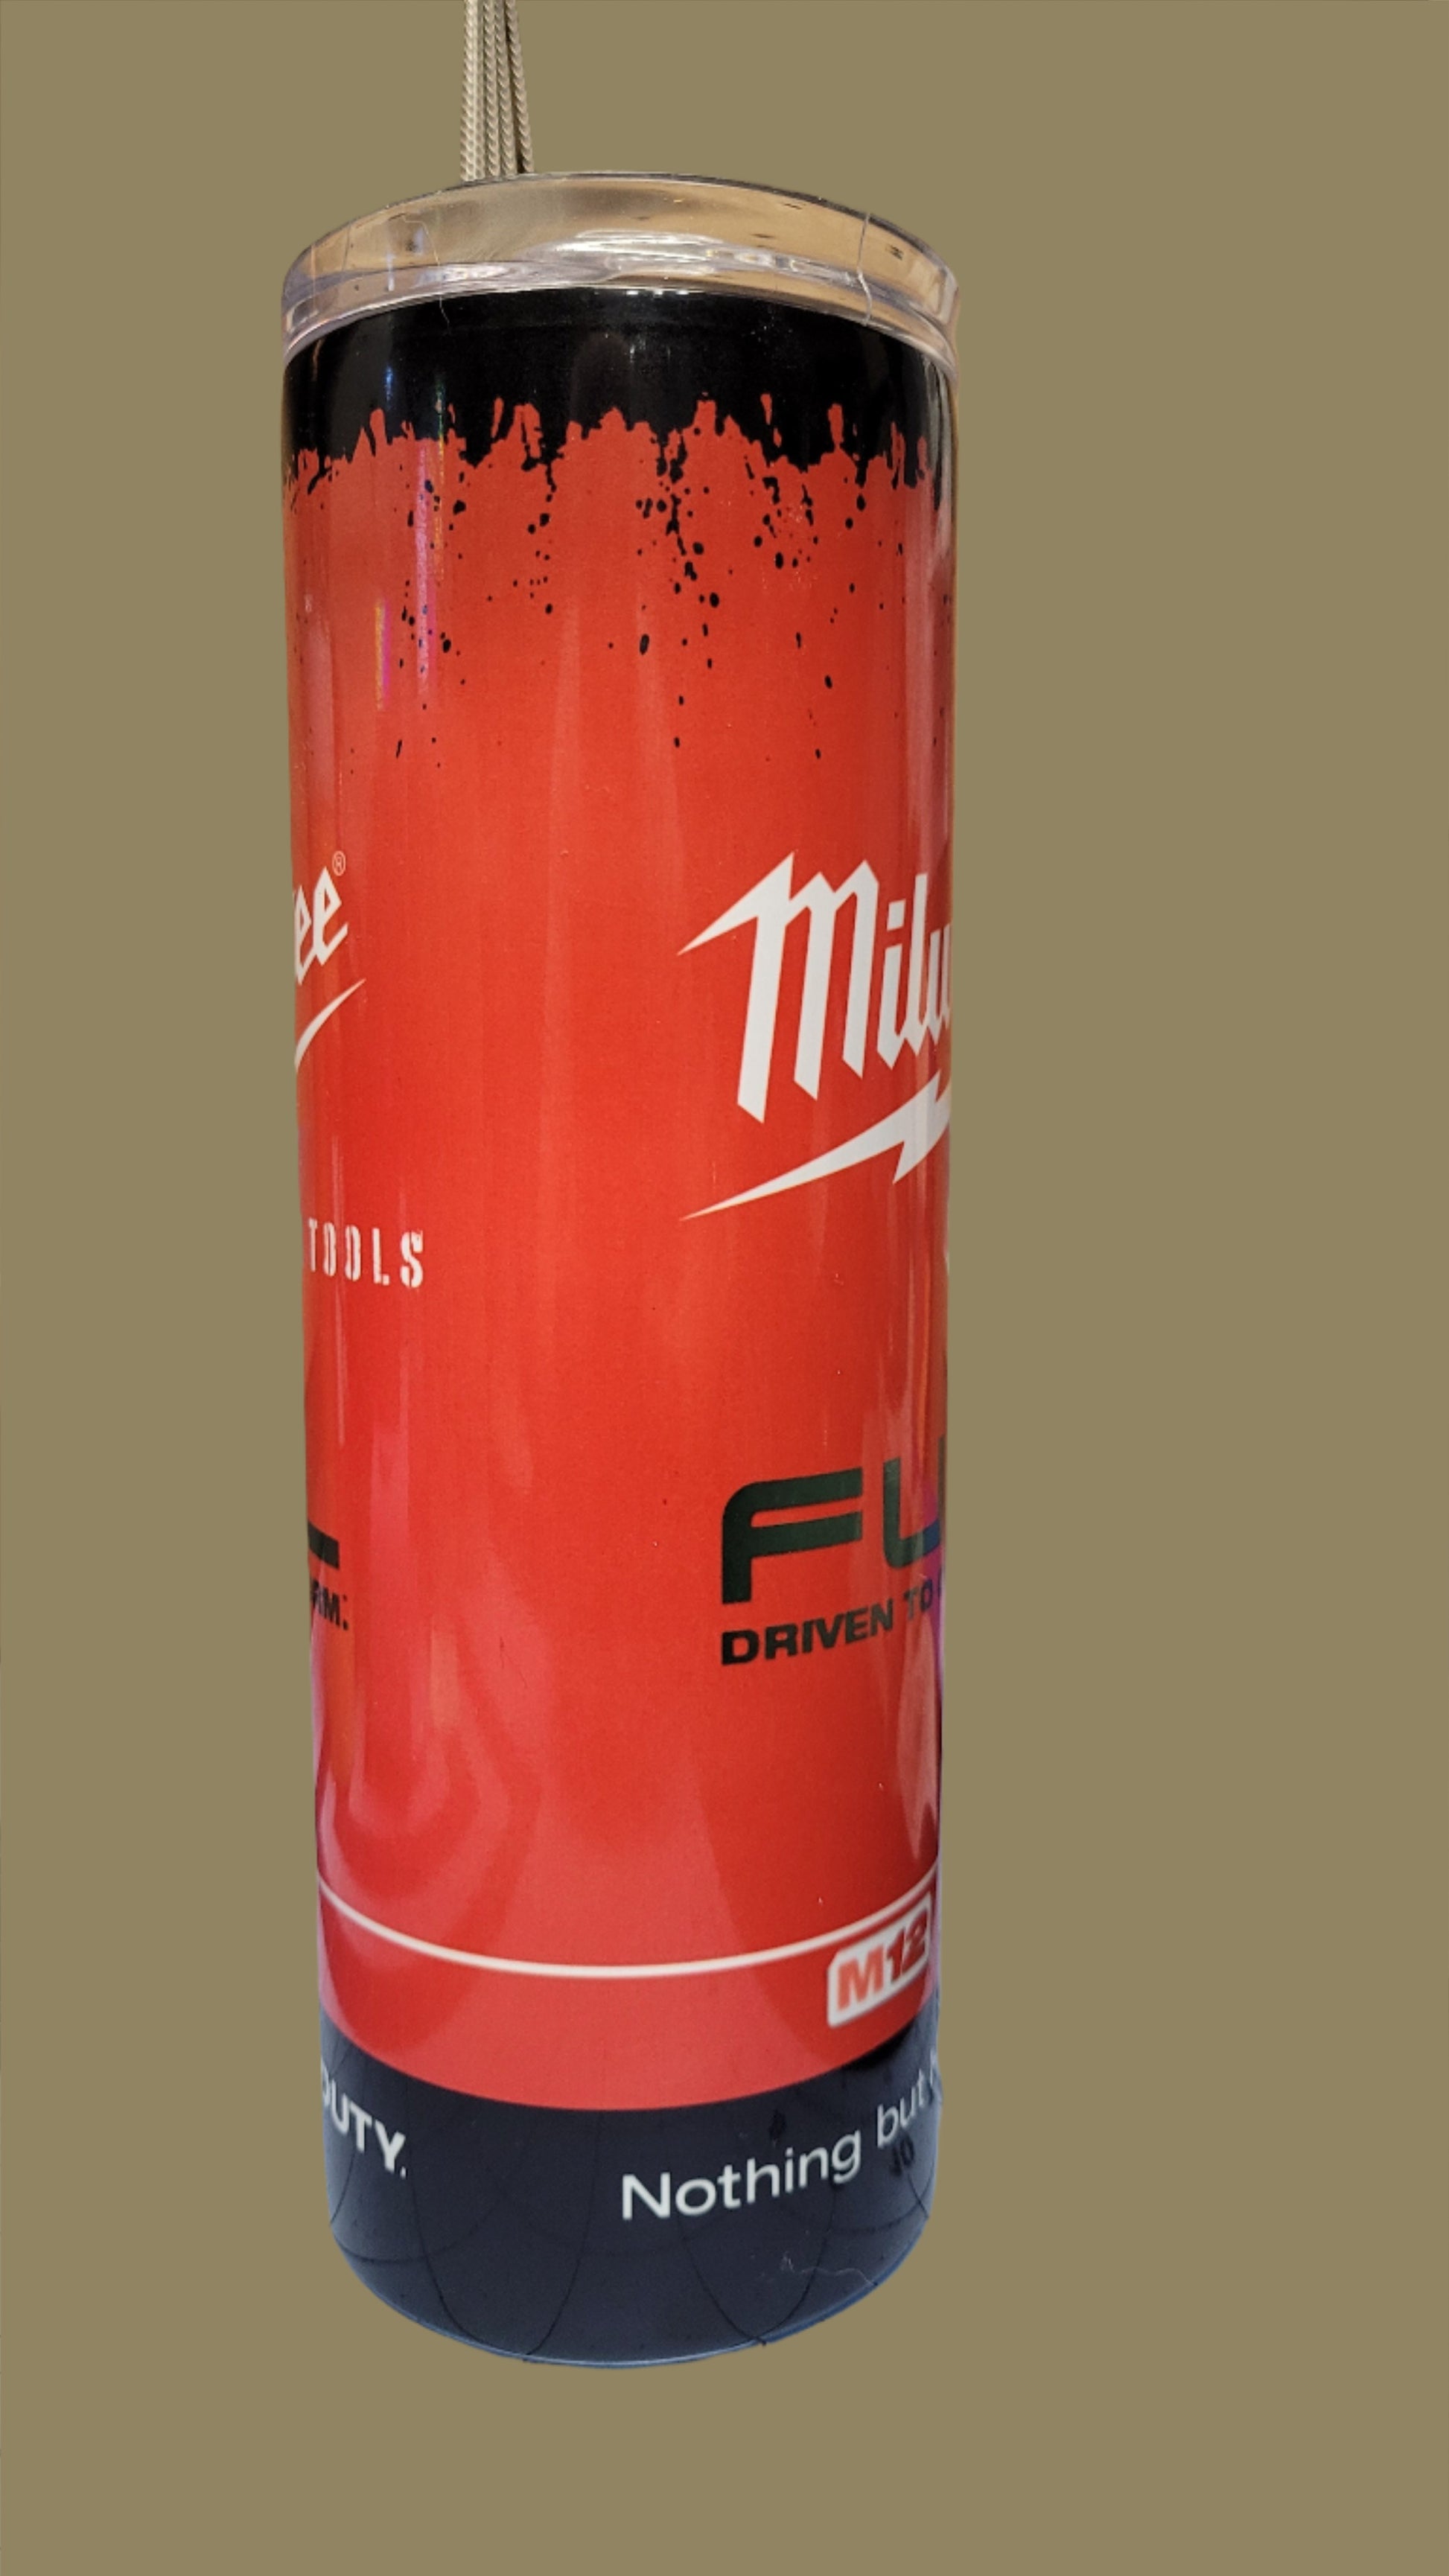 Here we have a Milwaukee Tool Fuel series fully depicting this new look. Great for the mechanic or any handyman. This 20 oz tumbler from Makerflo is made of a stainless steel double-wall construction and is vacuum insulated, with a clear sliding classic lid and a clear straw, and is BPA free. It is capable of retaining cold temperatures for 24+ hours or warm temperatures for up to 8 hours.